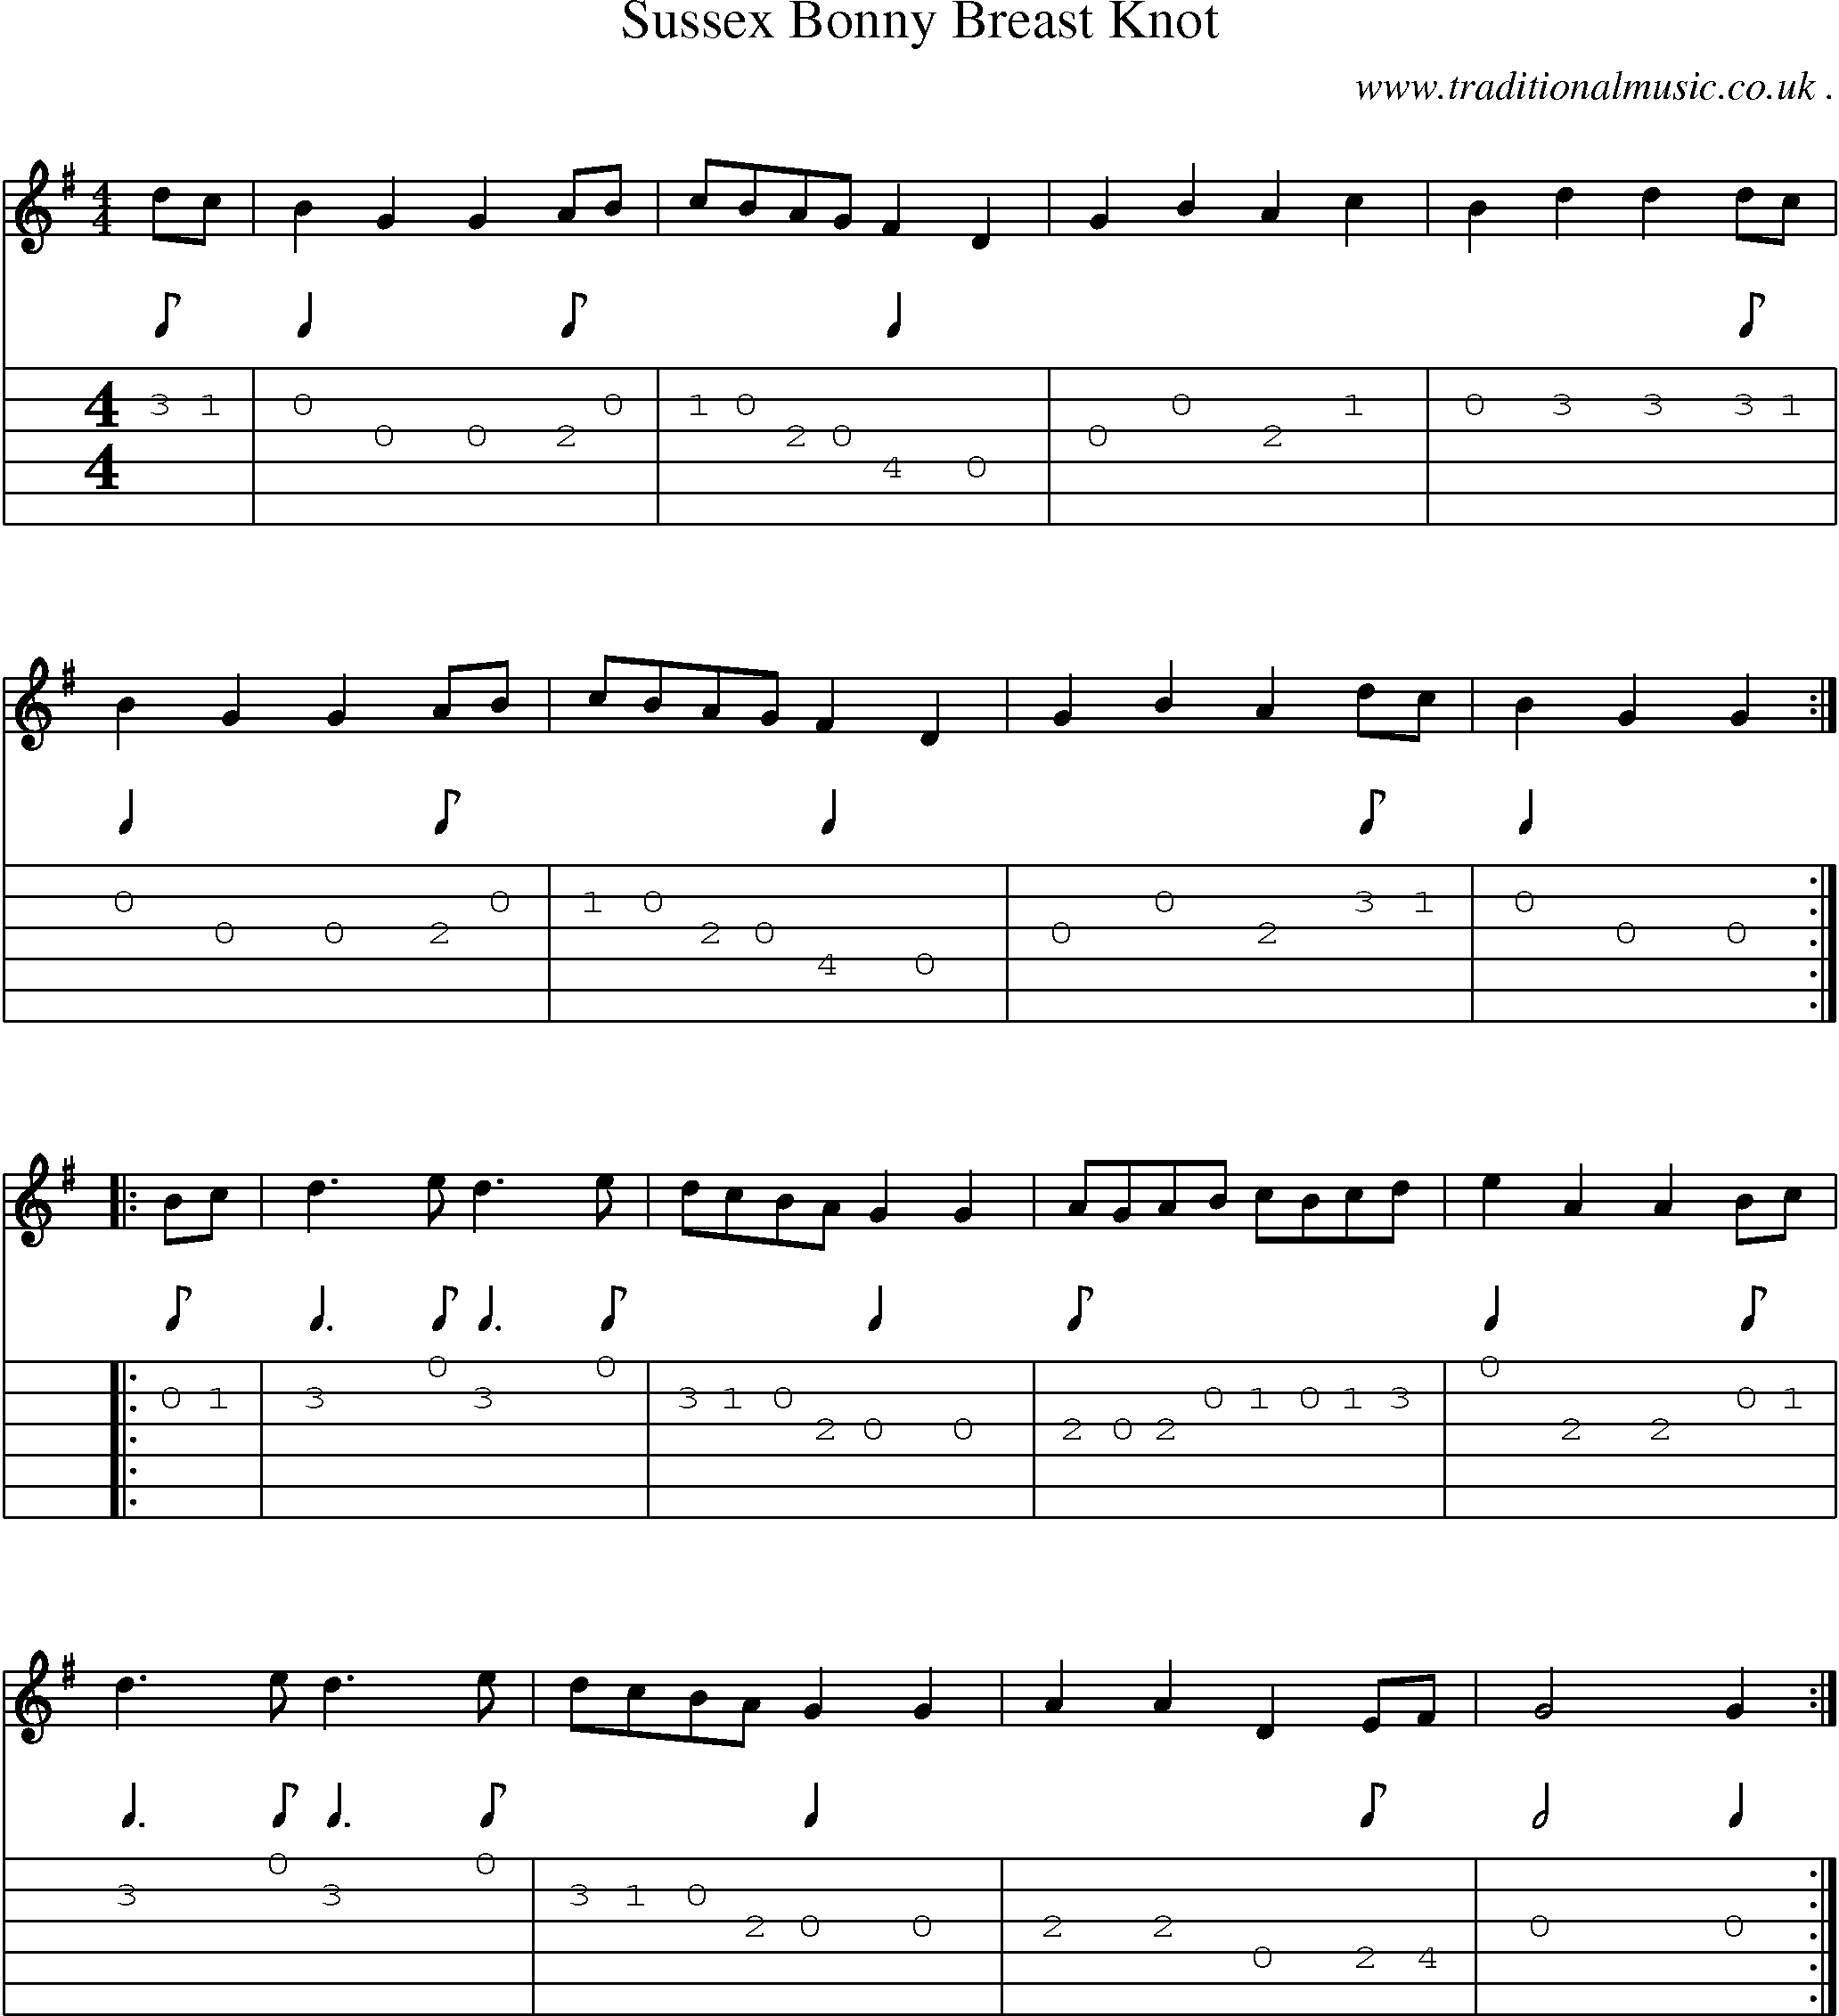 Sheet-Music and Guitar Tabs for Sussex Bonny Breast Knot